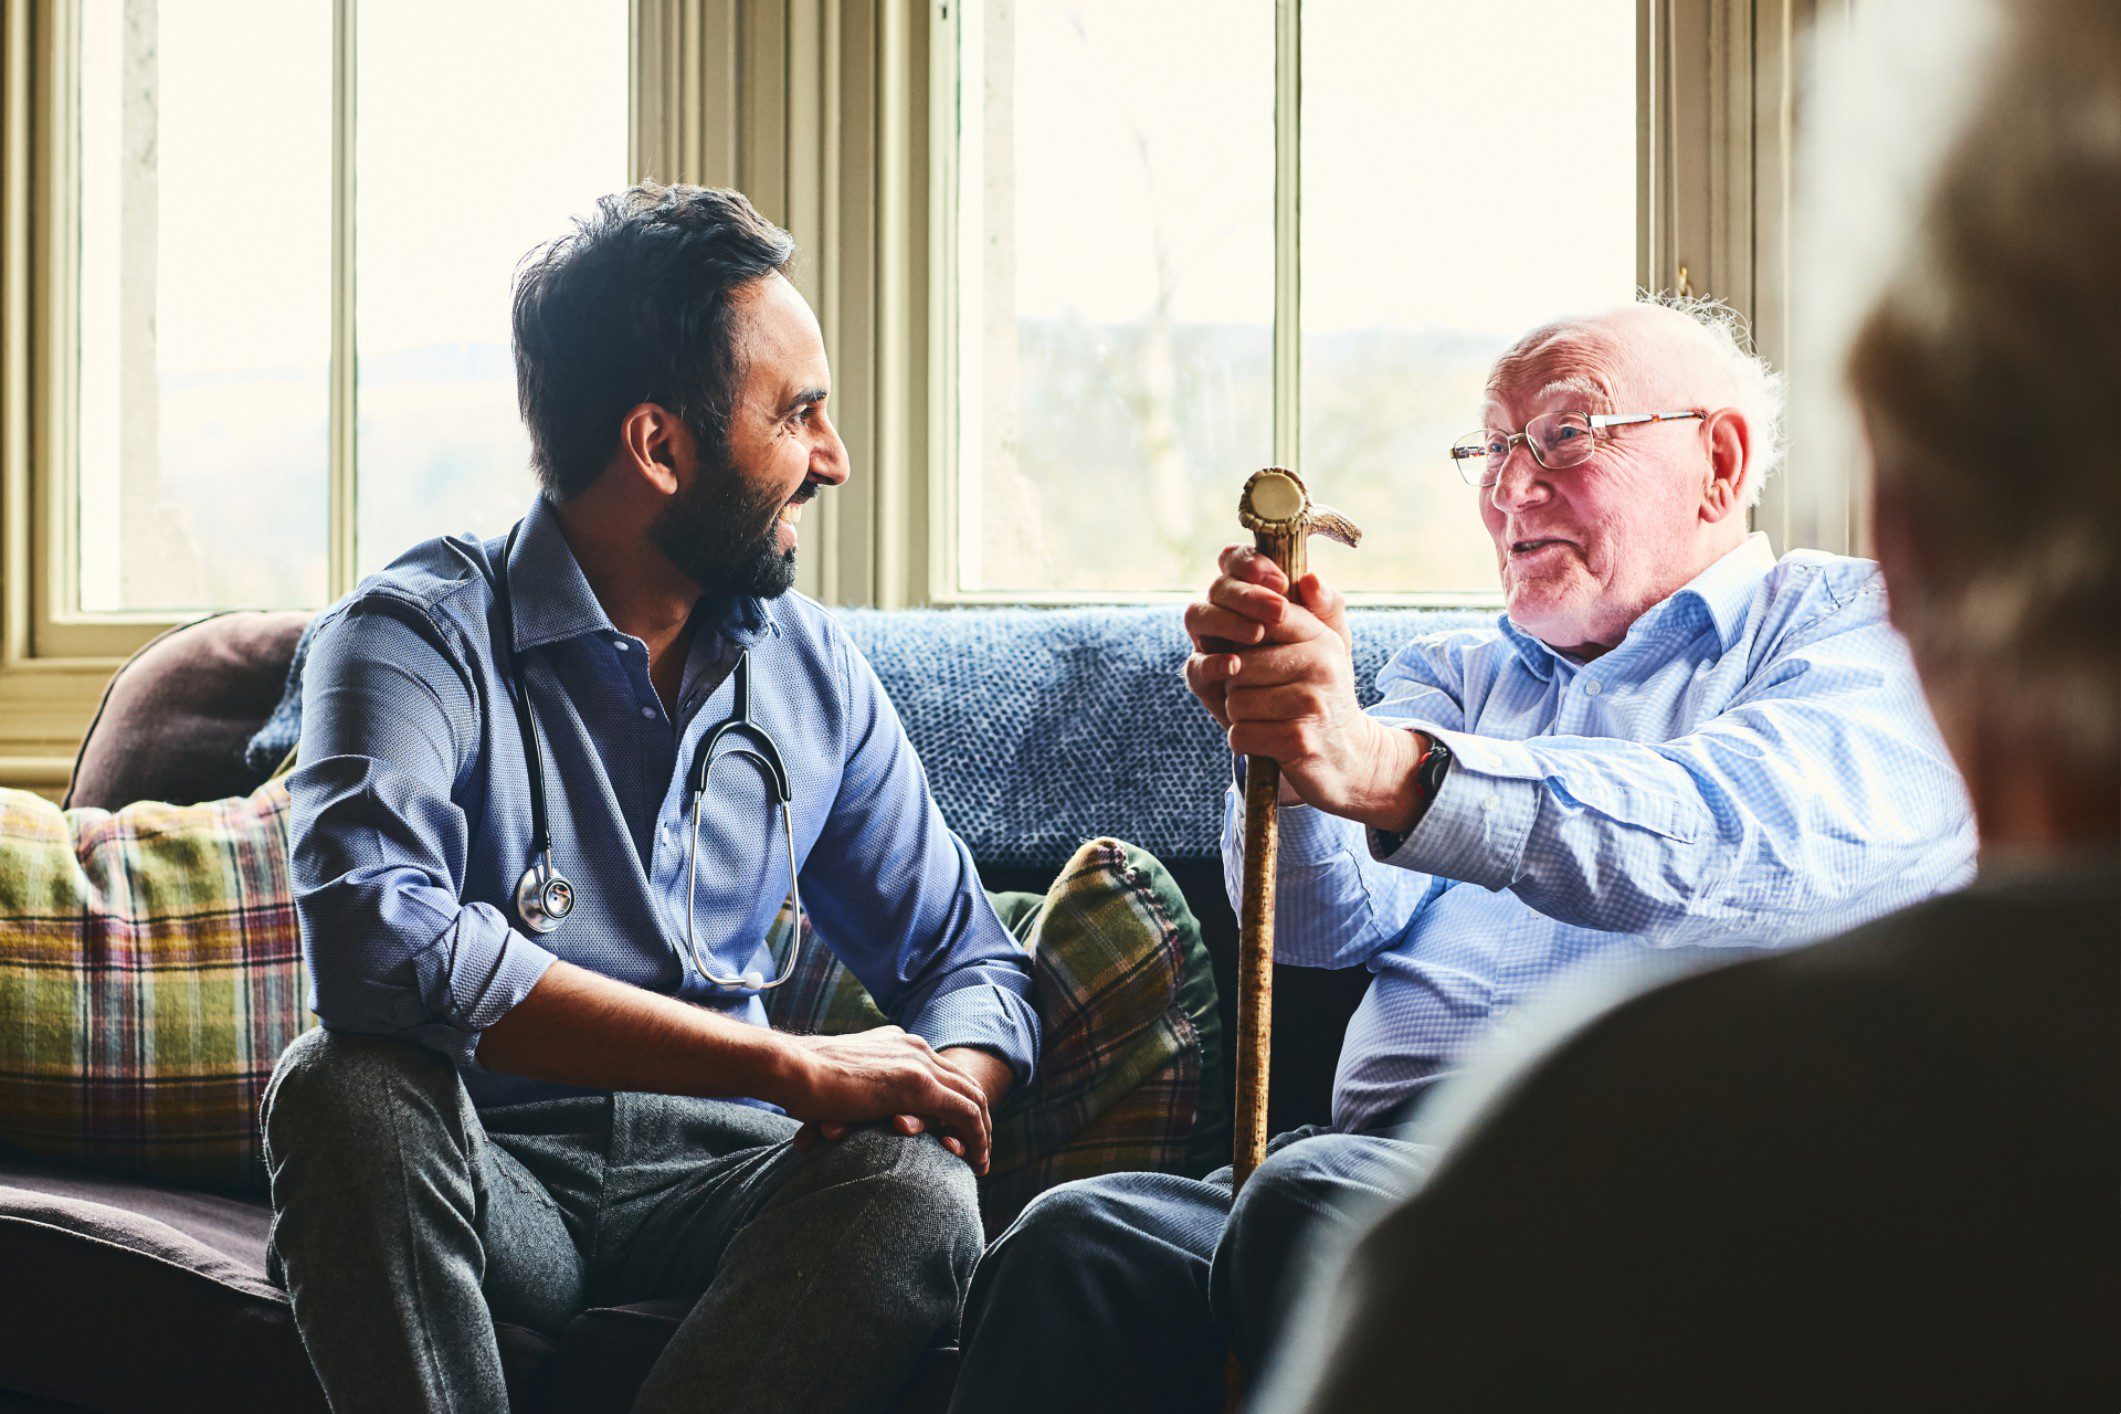 Home care providers don’t always prioritise continuity of care